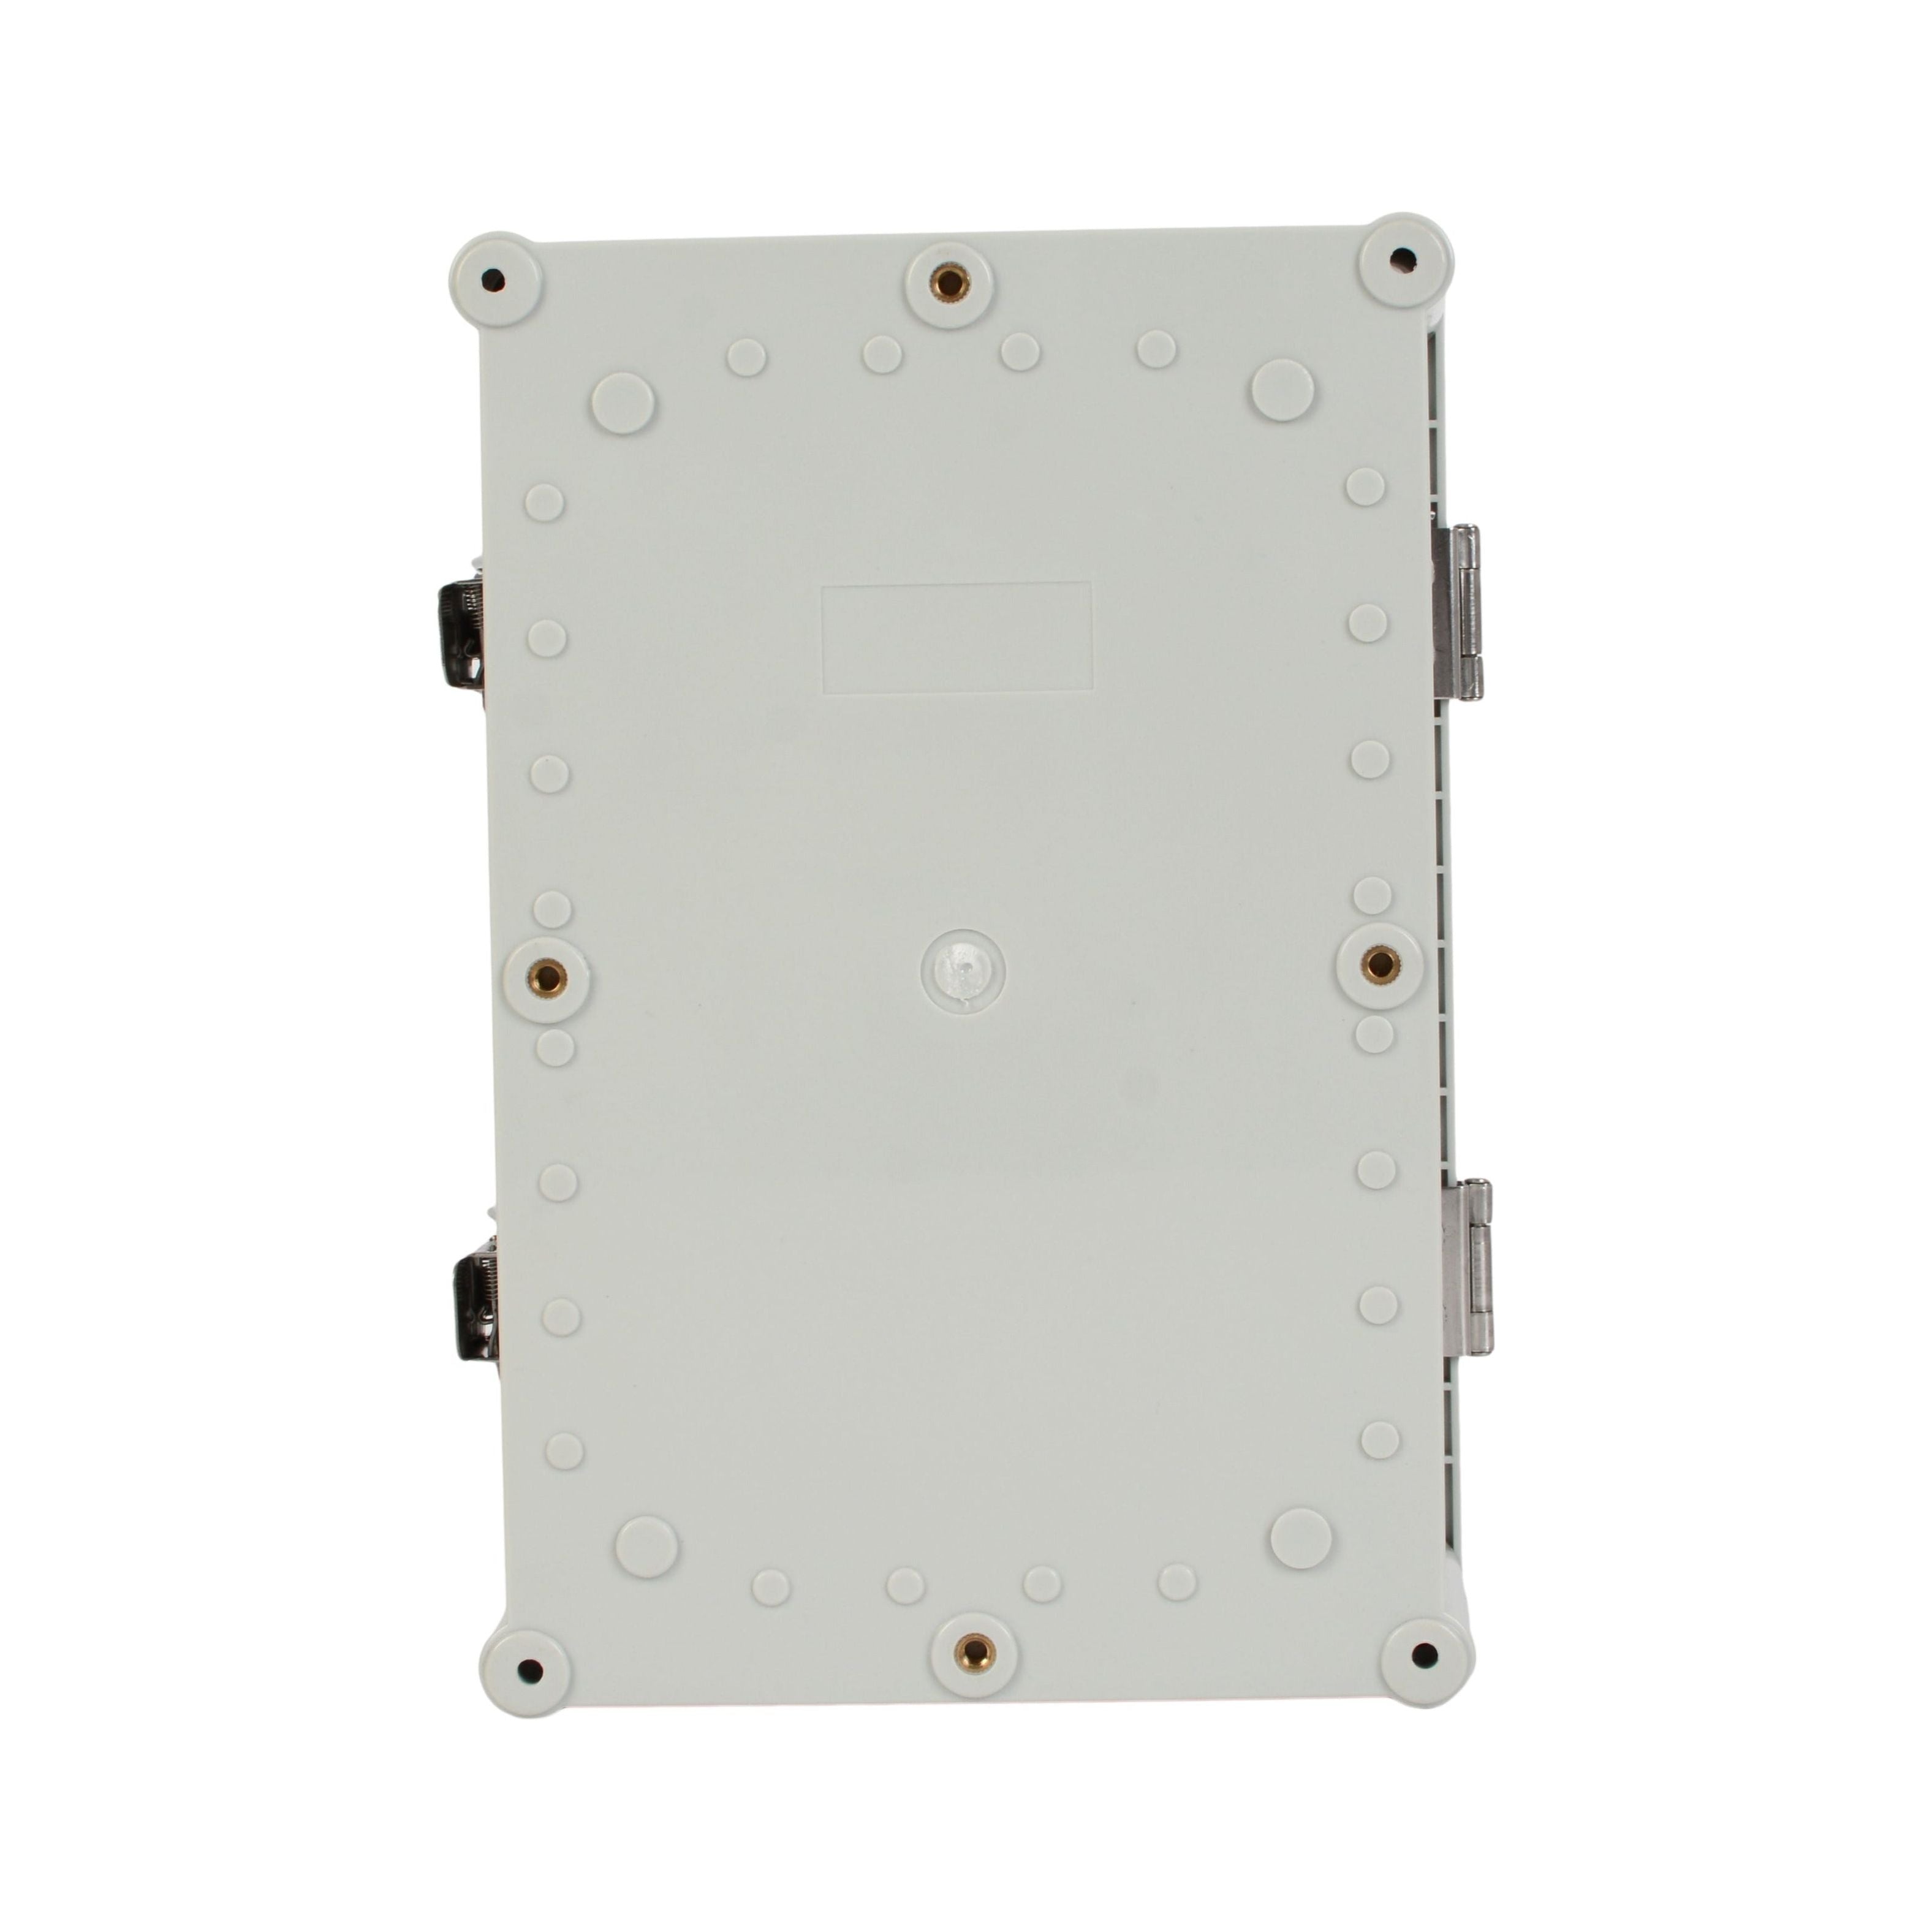 ABS IP66 Clear Lid Hinge Junction Box 280 x 190 x 130mm